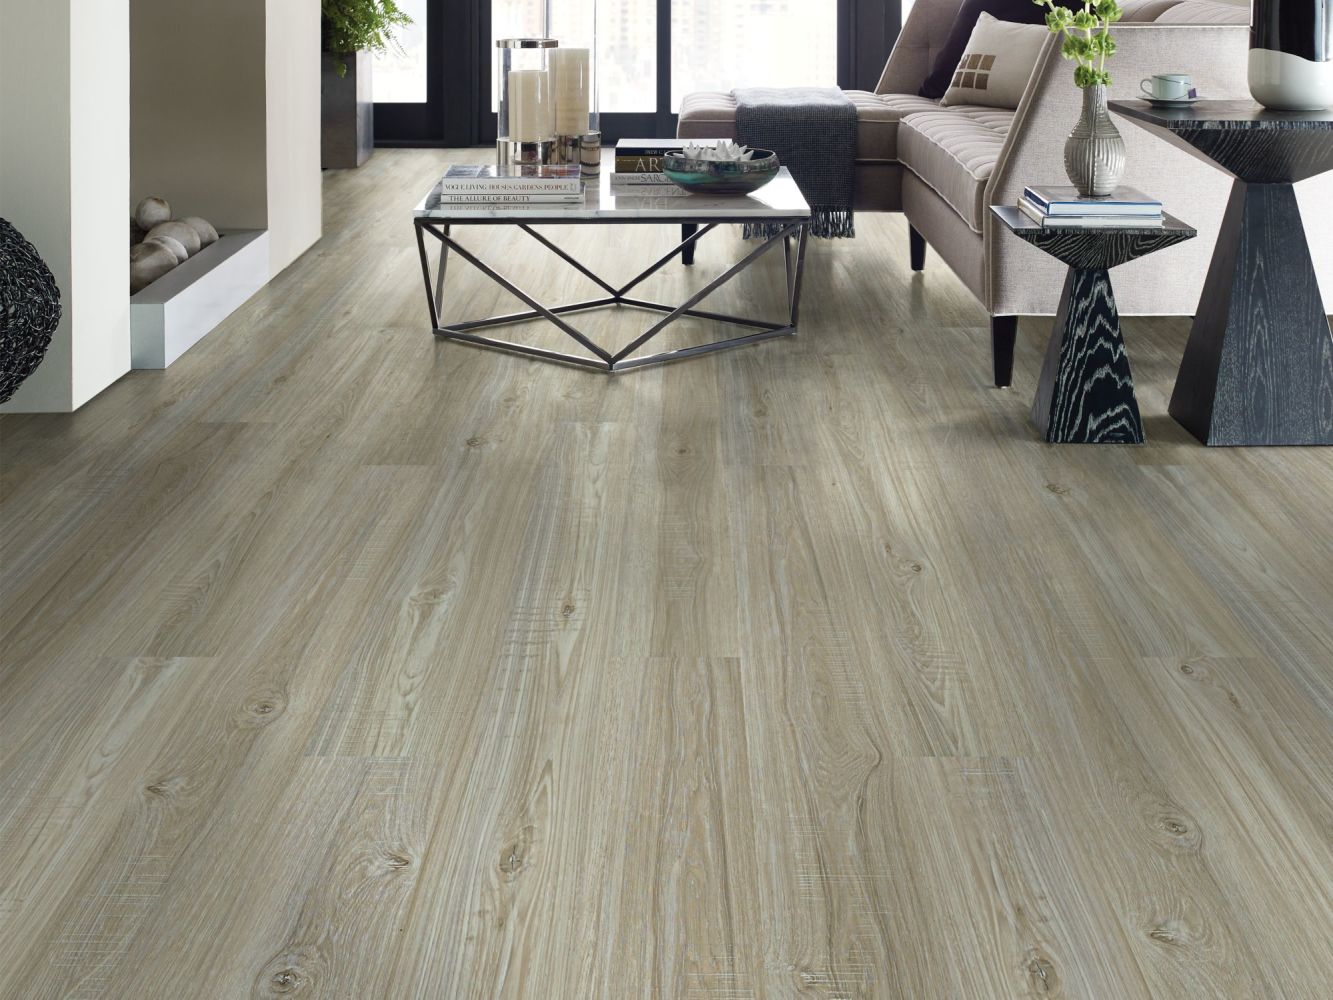 Shaw Floors Reality Homes Dungeness Washed Oak 00509_100RH